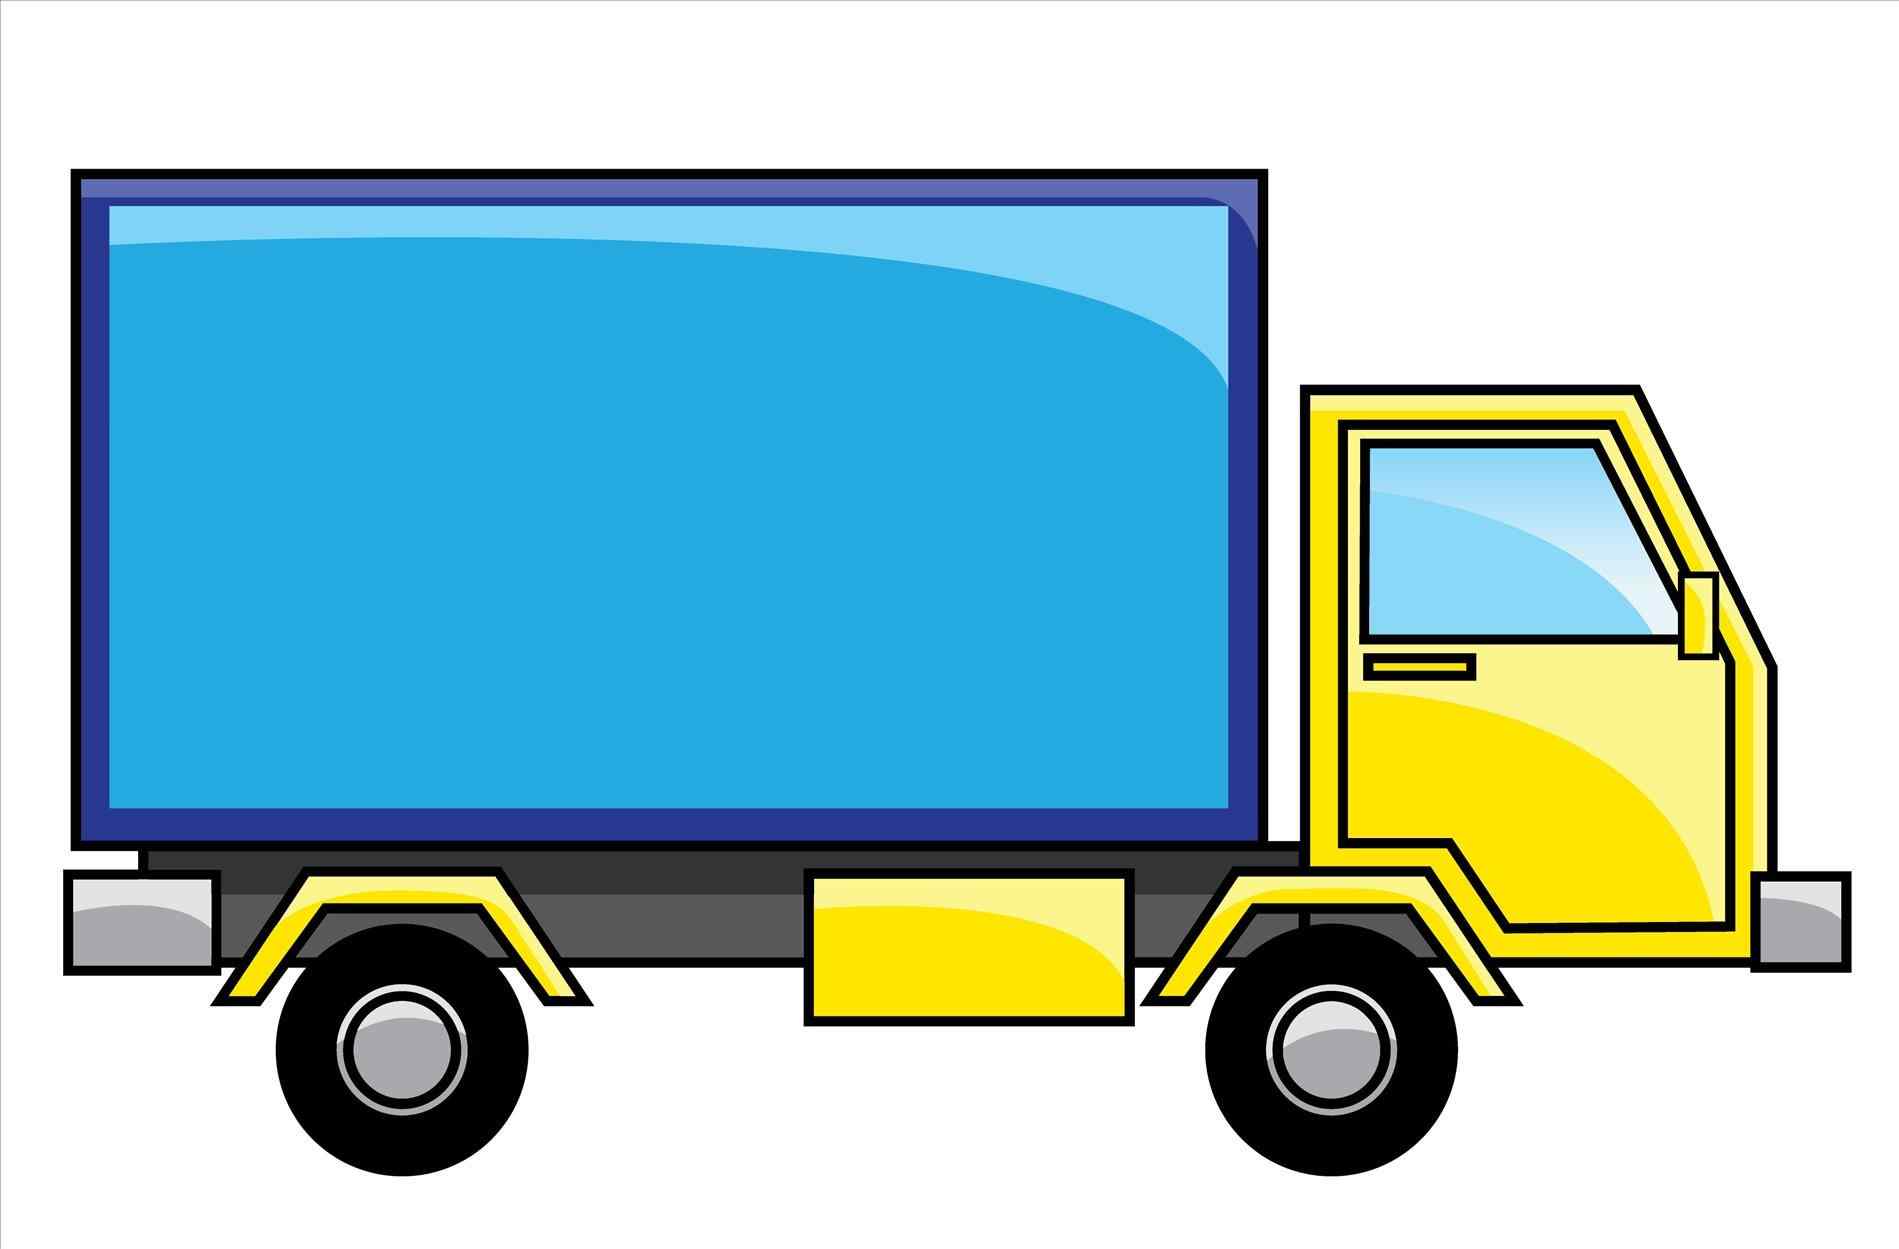 Truck clipart. The images collection of